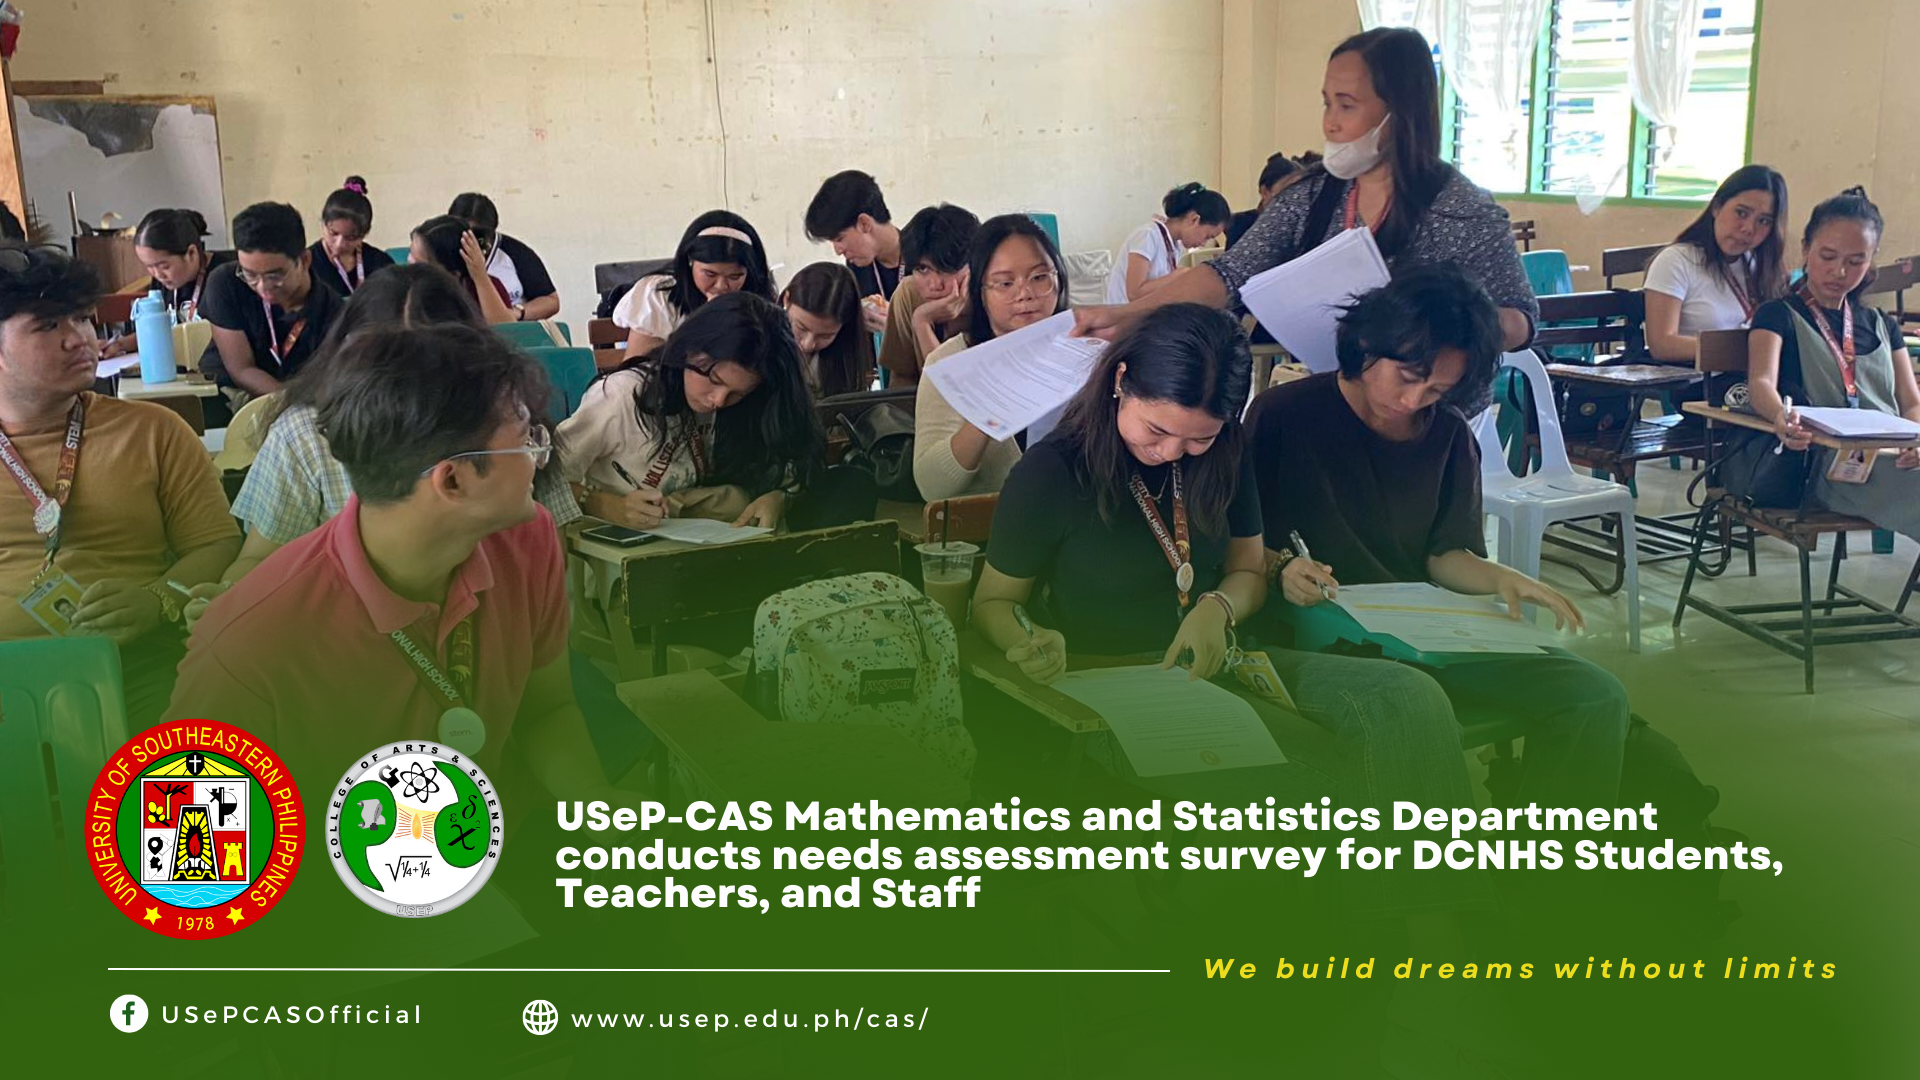 USeP-CAS Mathematics and Statistics Department conducts needs assessment survey for DCNHS Students, Teachers, and Staff